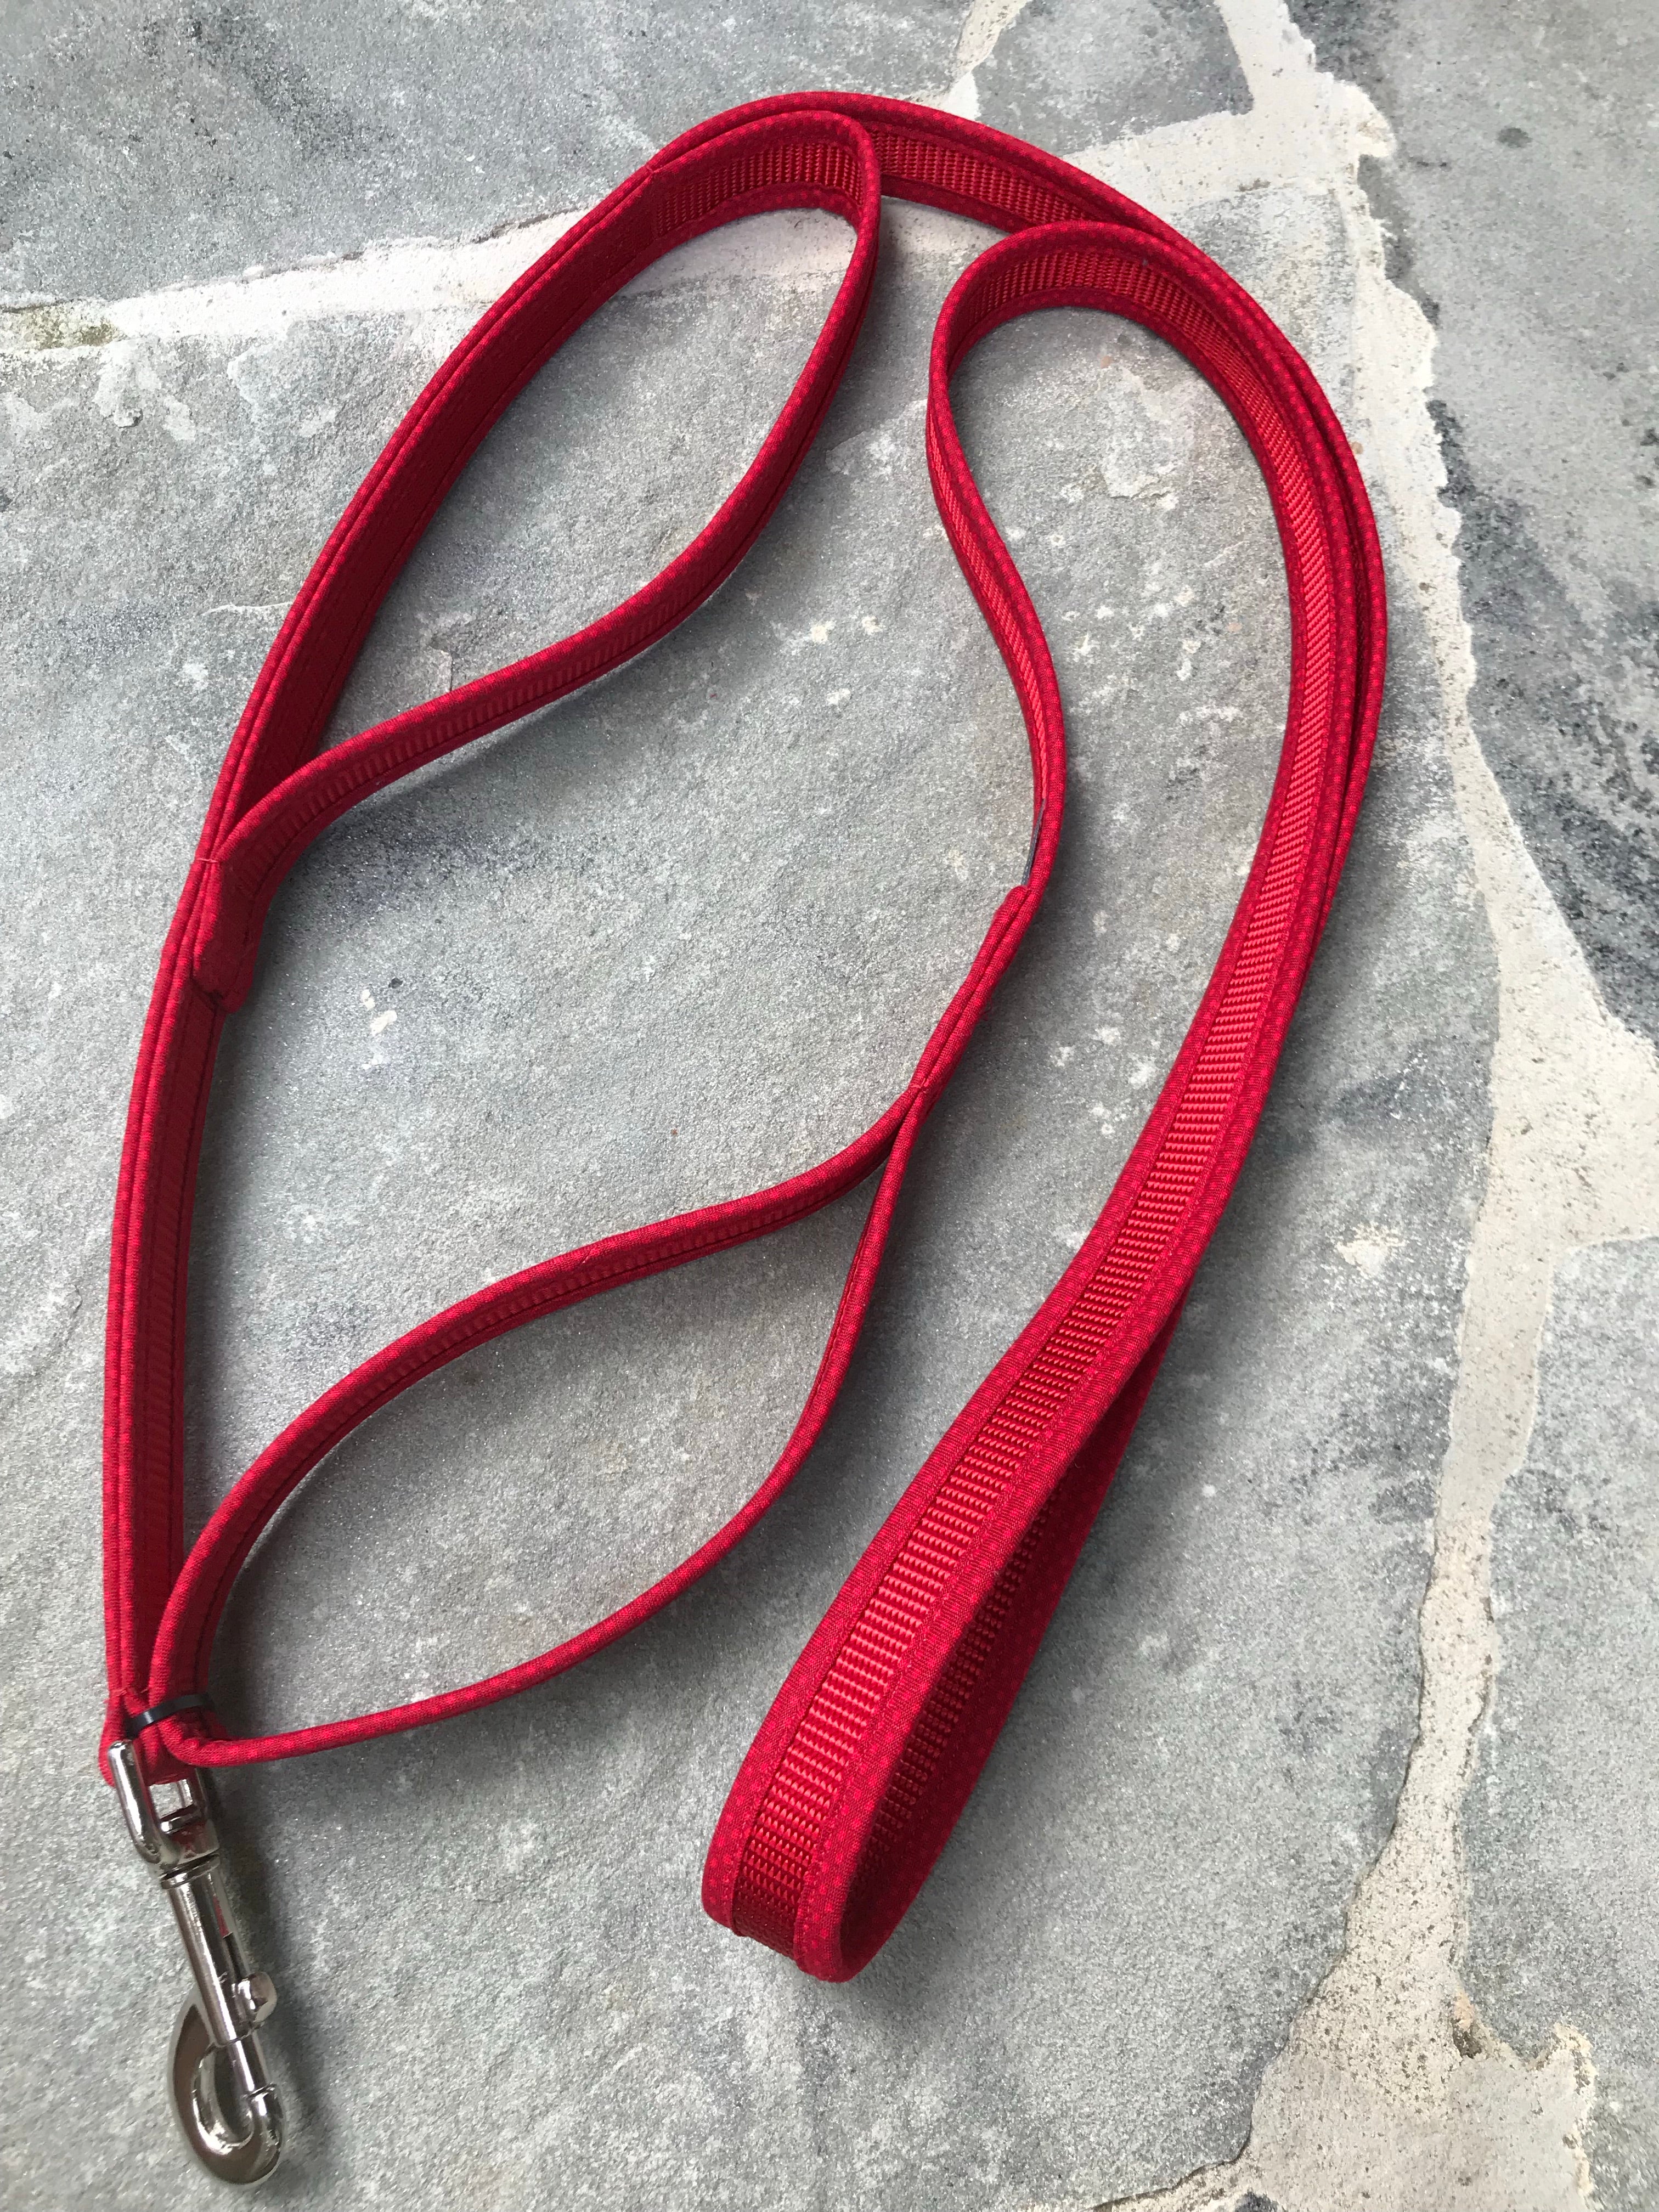 Double Handle Dog Leash | Red on Red | Stitchpet